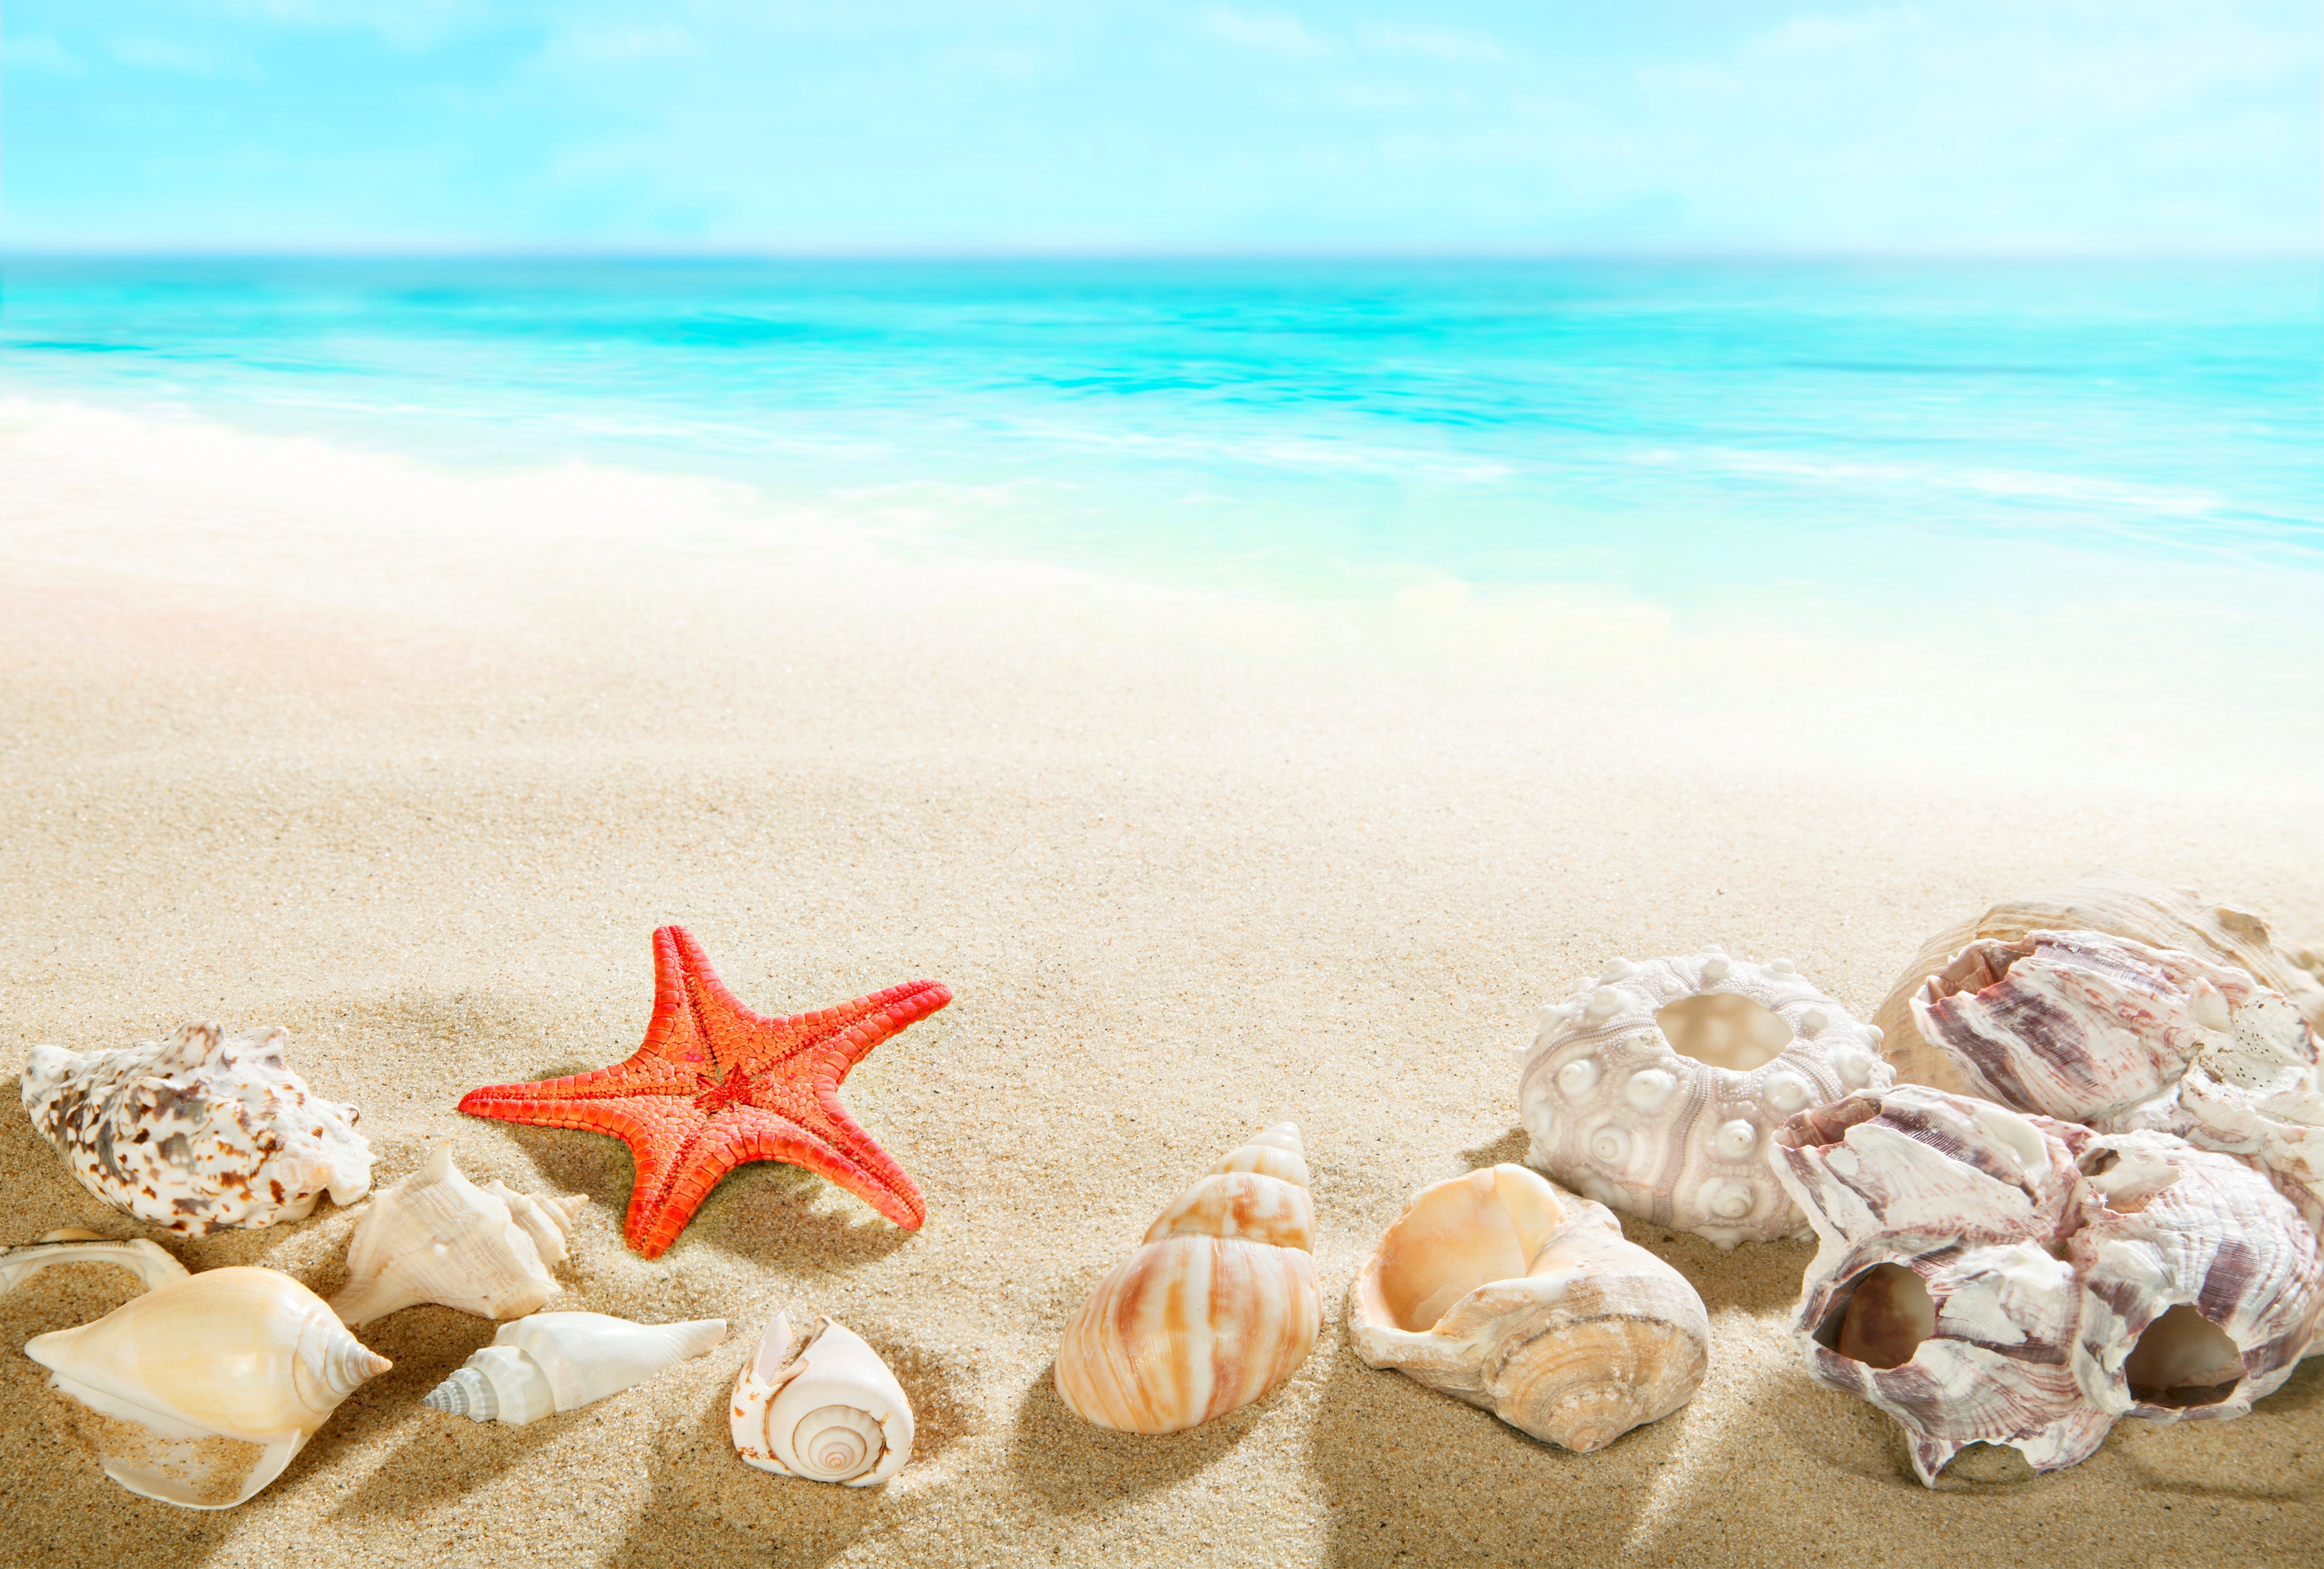 Starfish and seashells on the sand near the blue water of ...